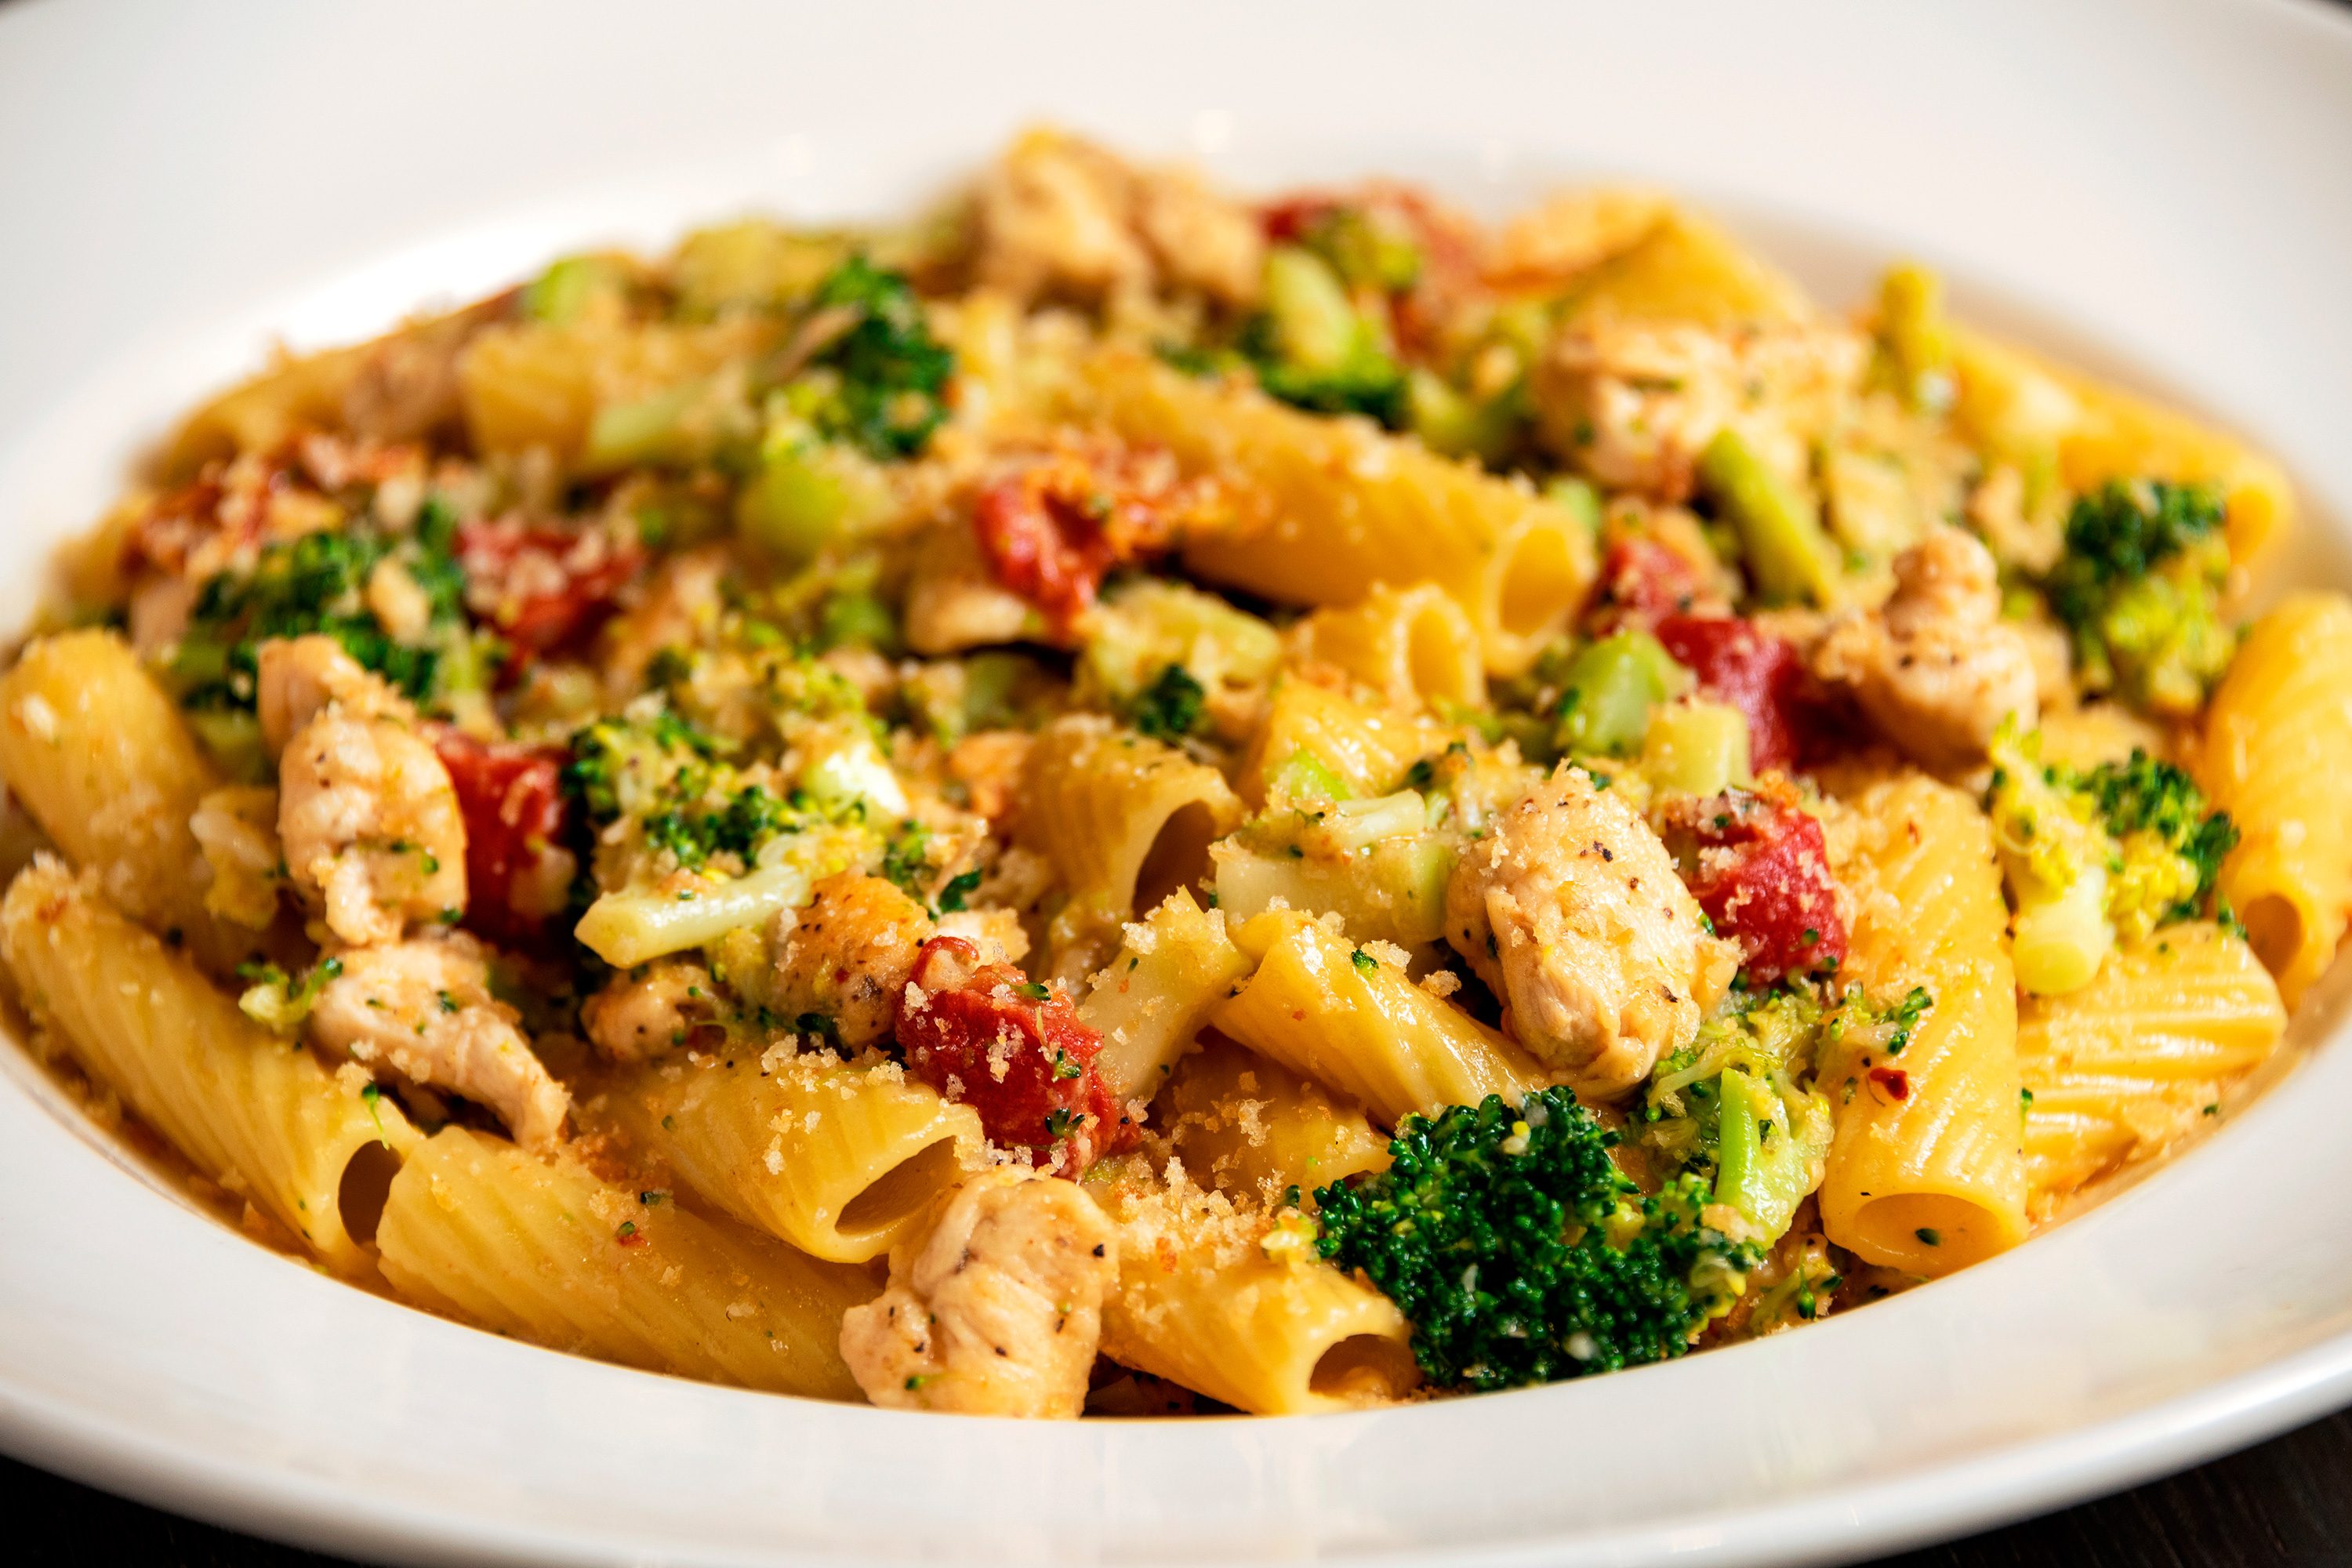 Cheesecake Factory Chicken And Broccoli Pasta